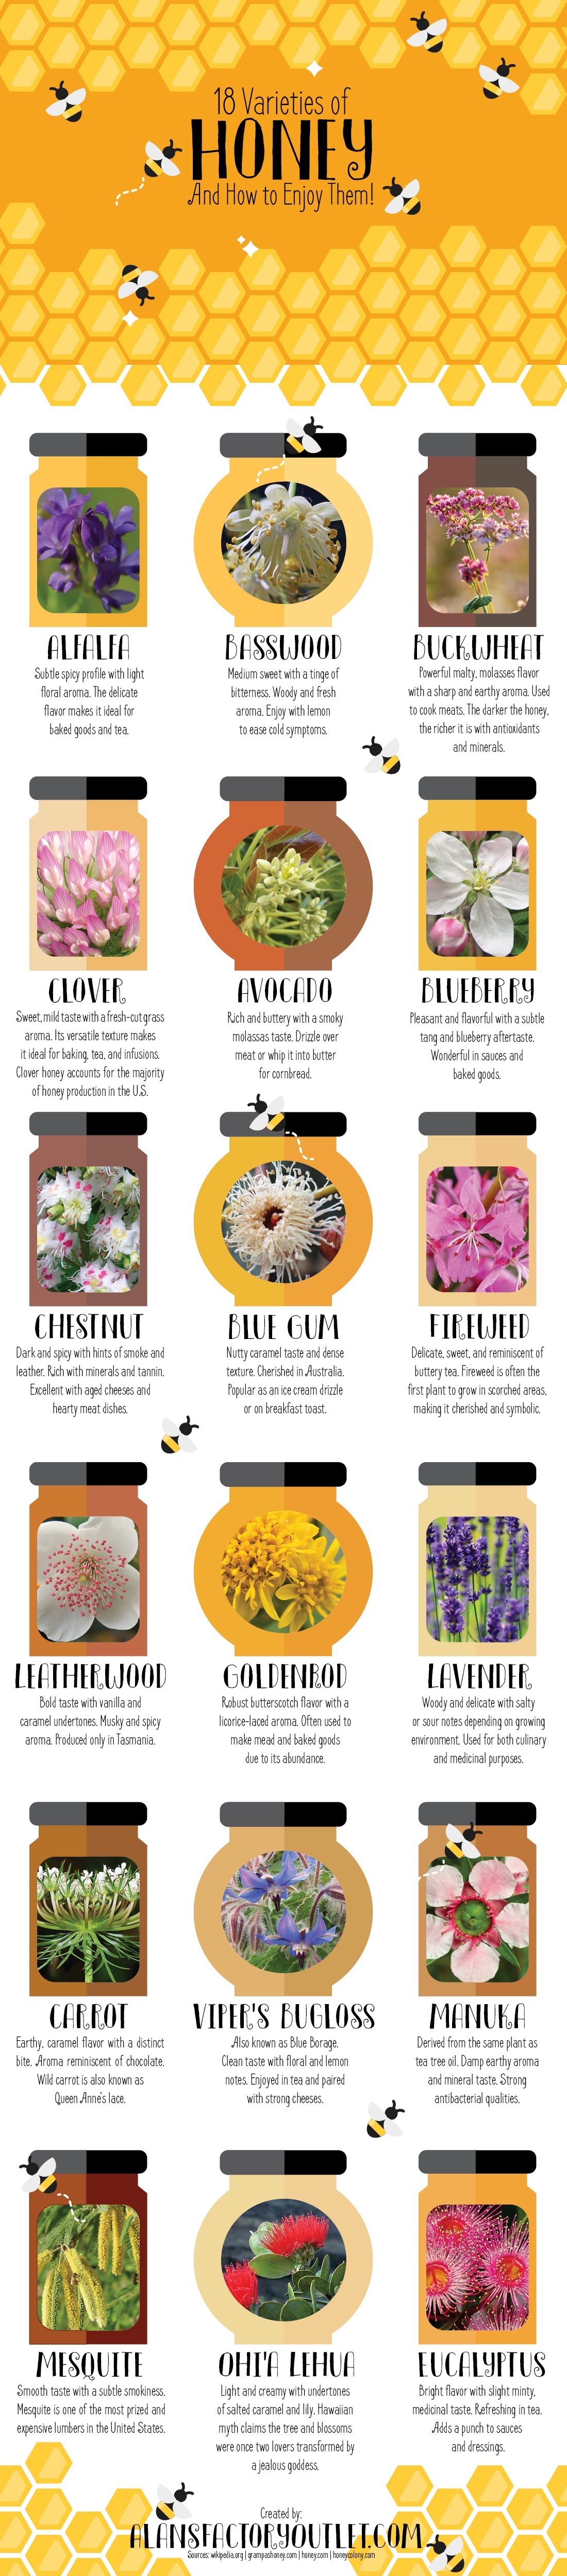 18 Varieties of Honey and How to Enjoy Them